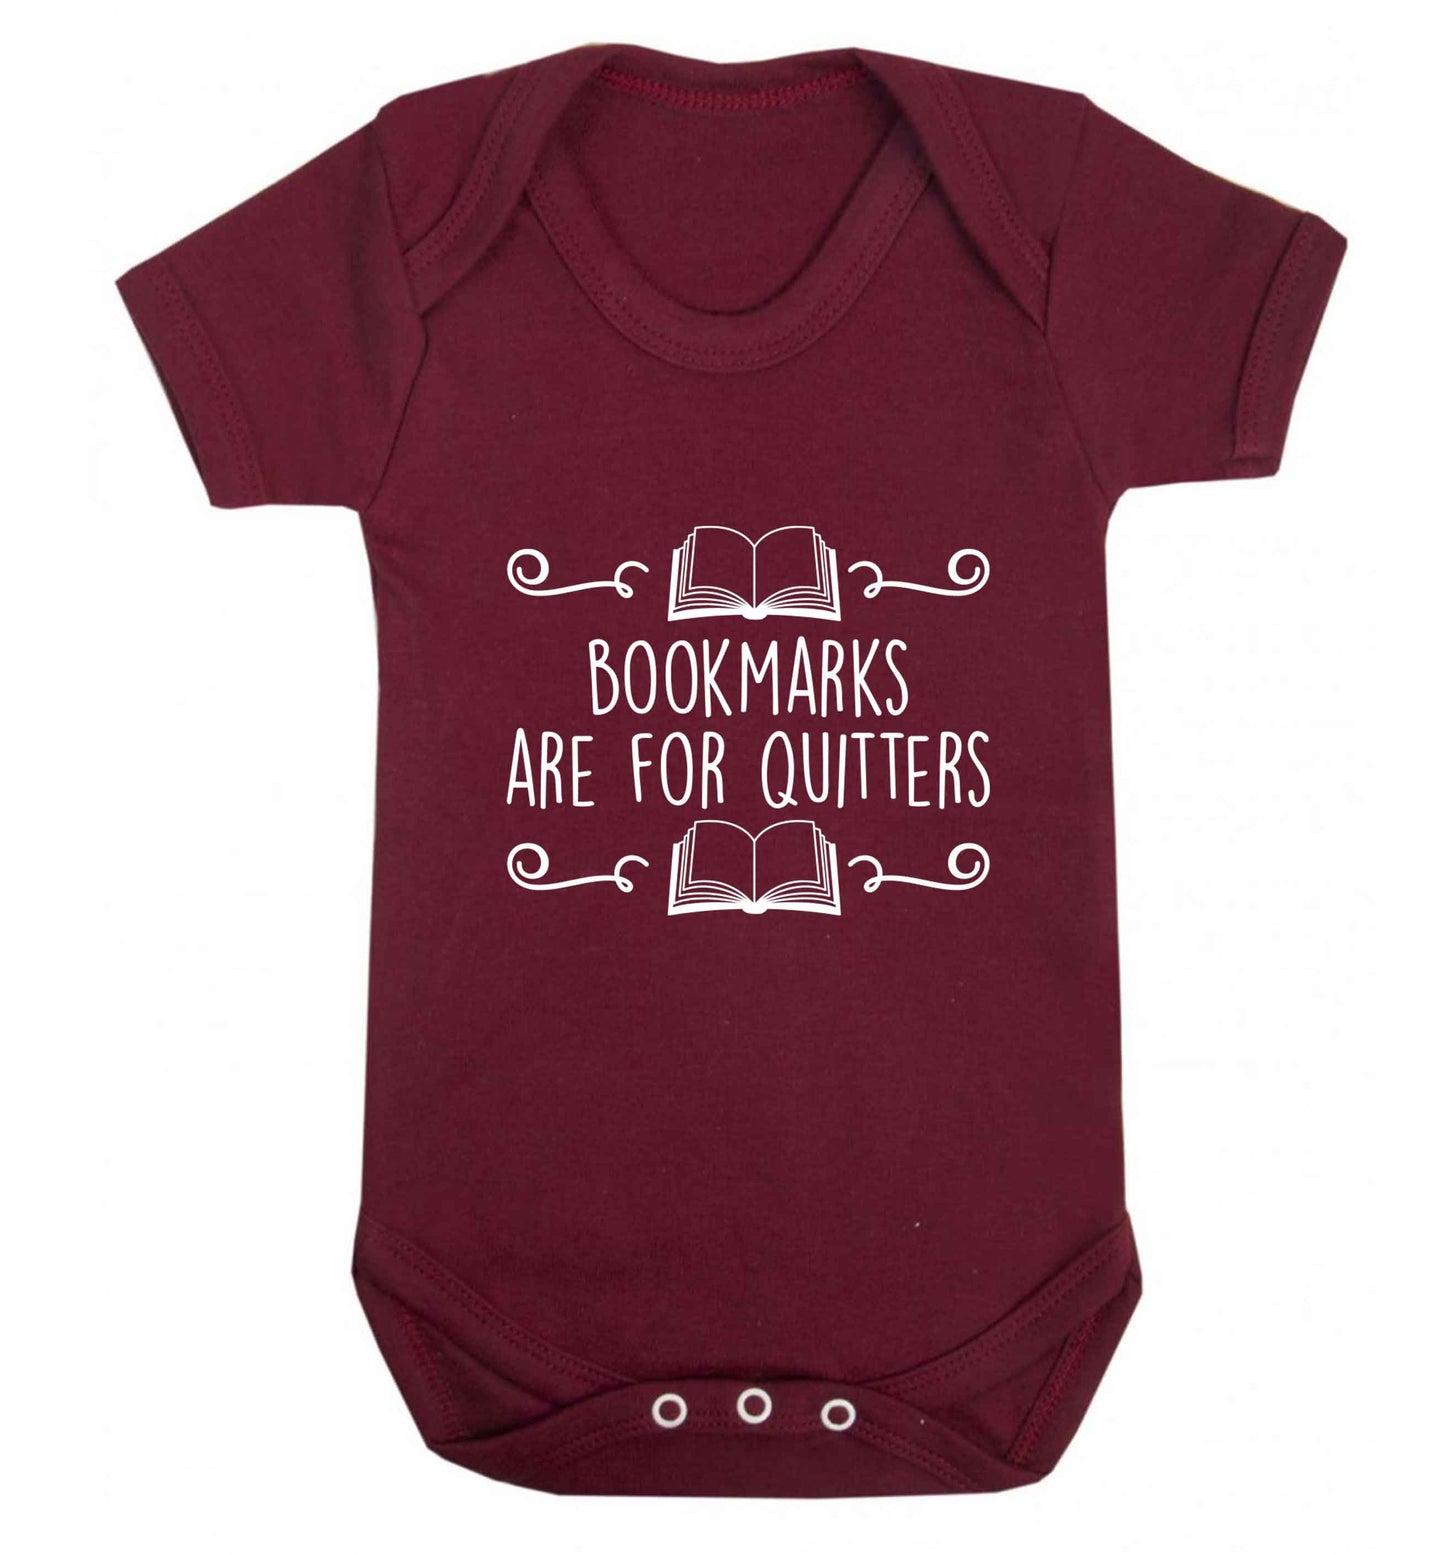 Bookmarks are for quitters baby vest maroon 18-24 months